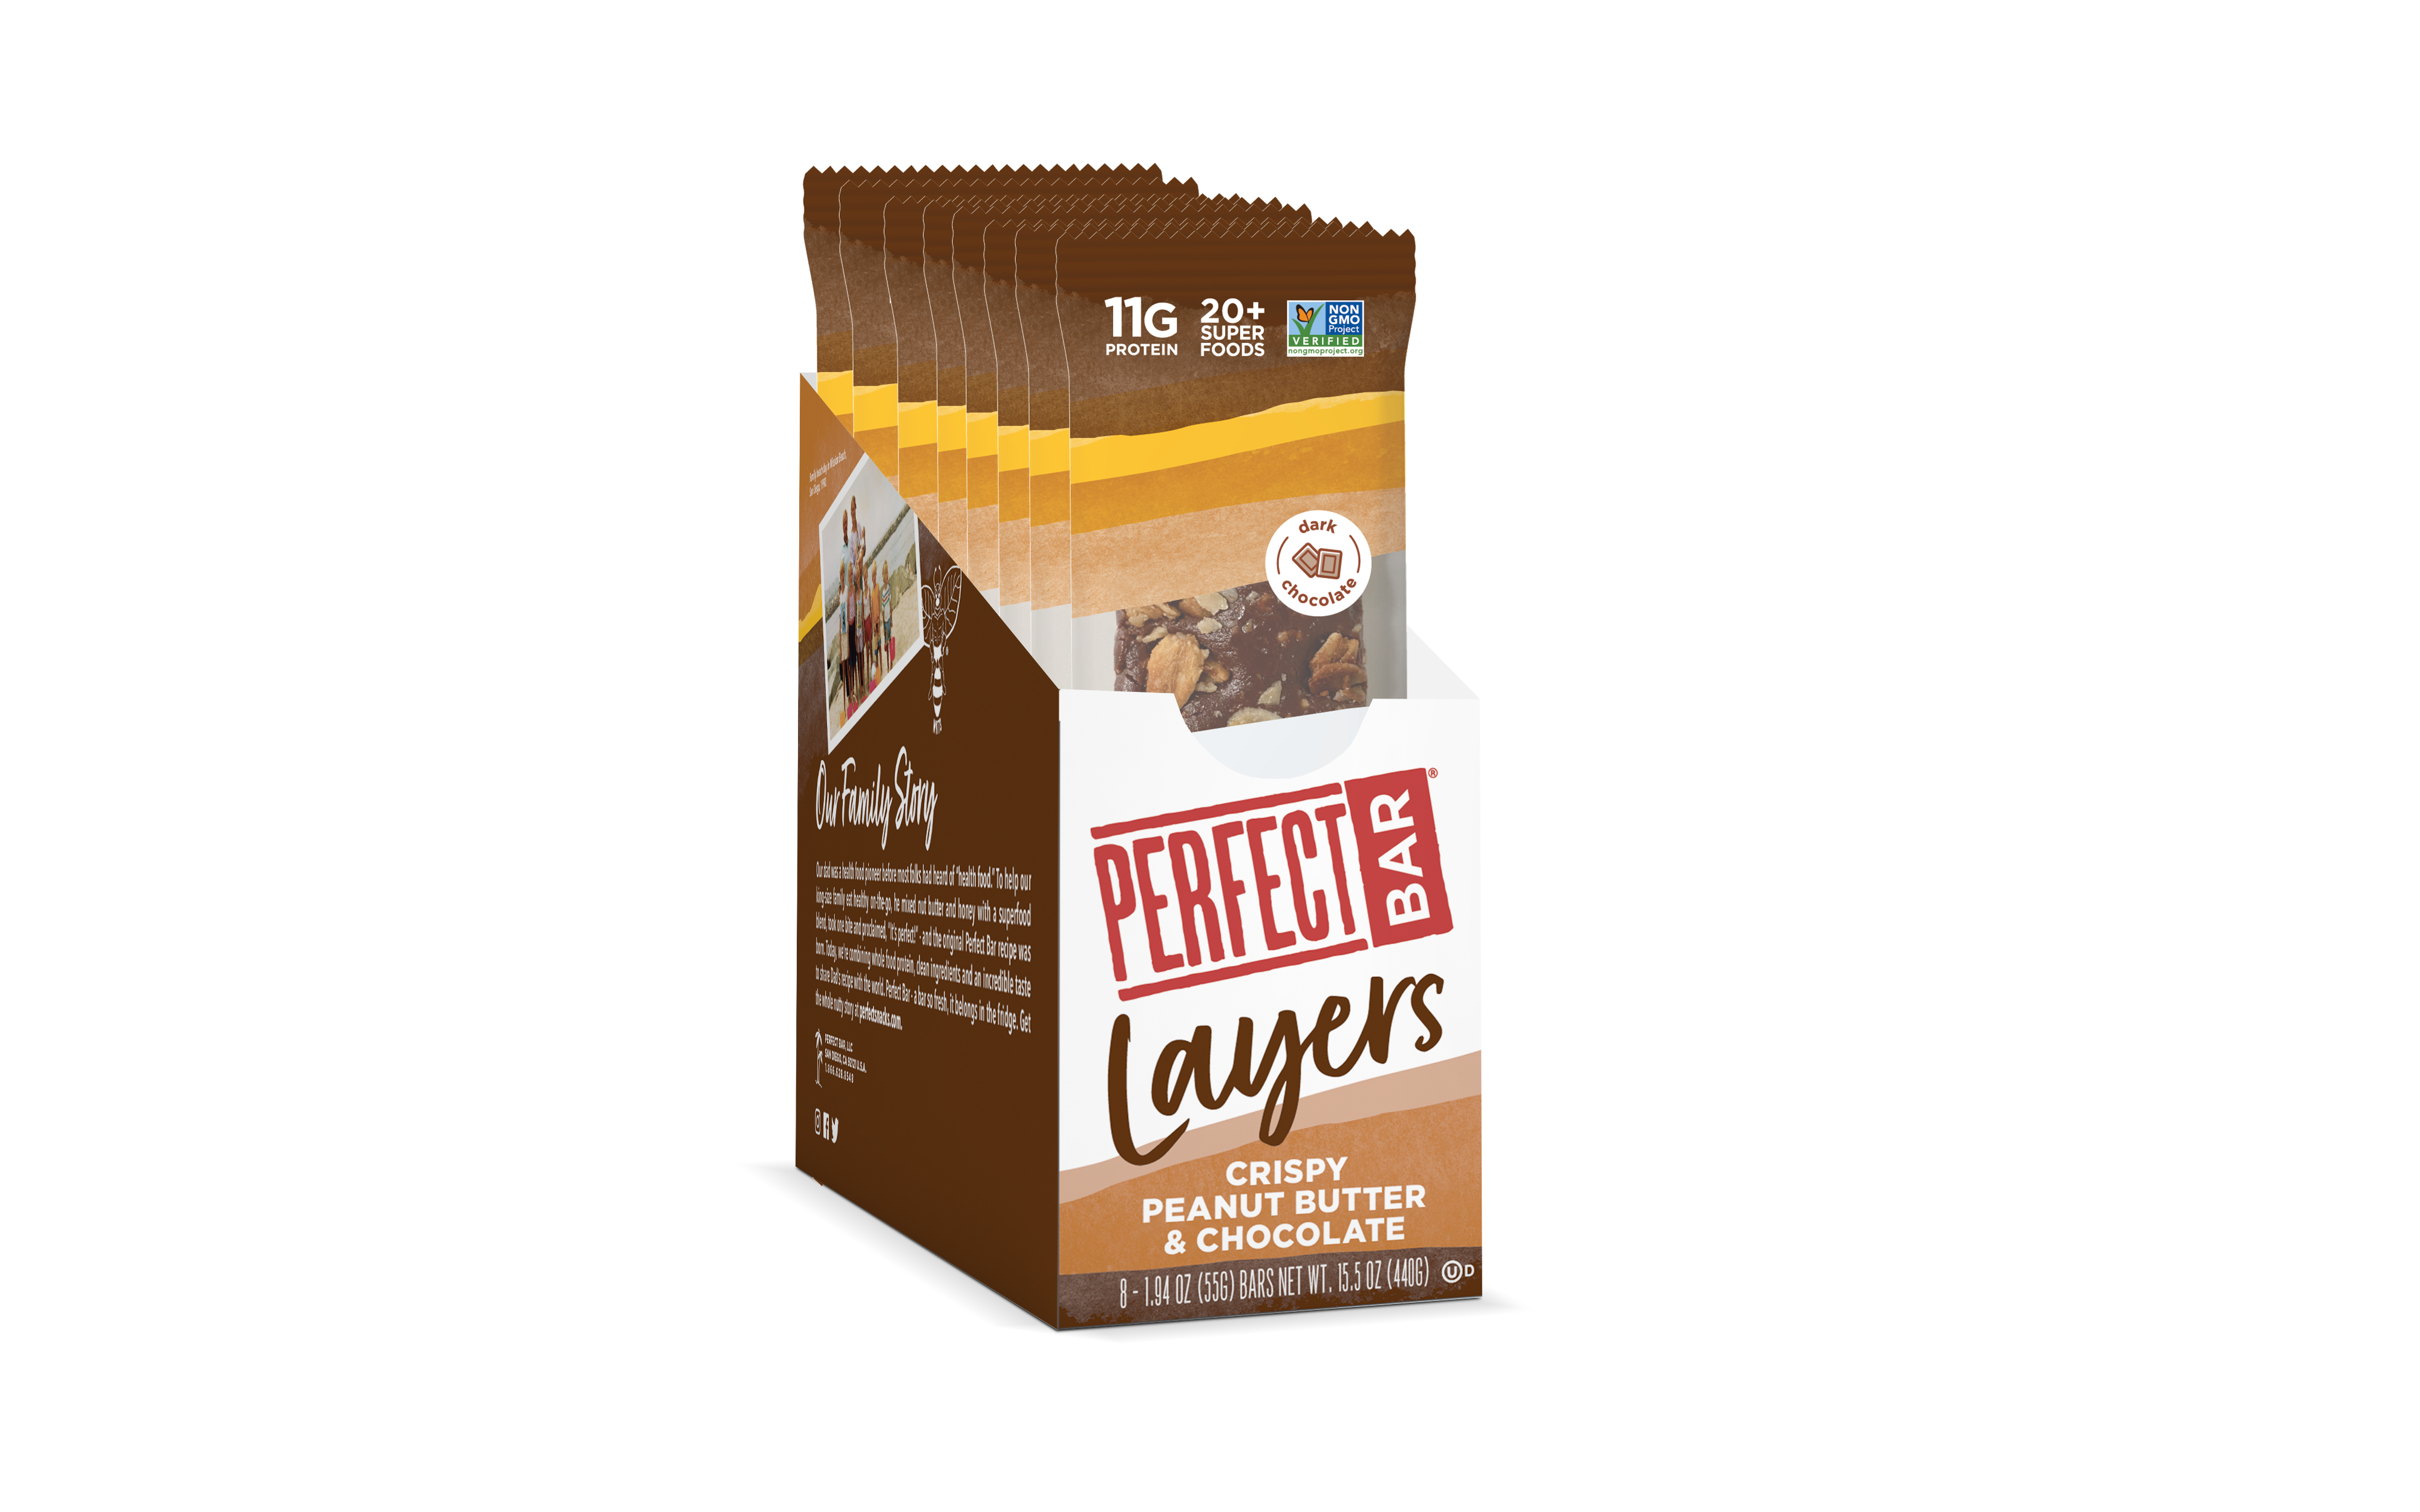 Crispy Peanut Butter & Chocolate Layers: A velvety layer of dark chocolate and 11g of whole food protein